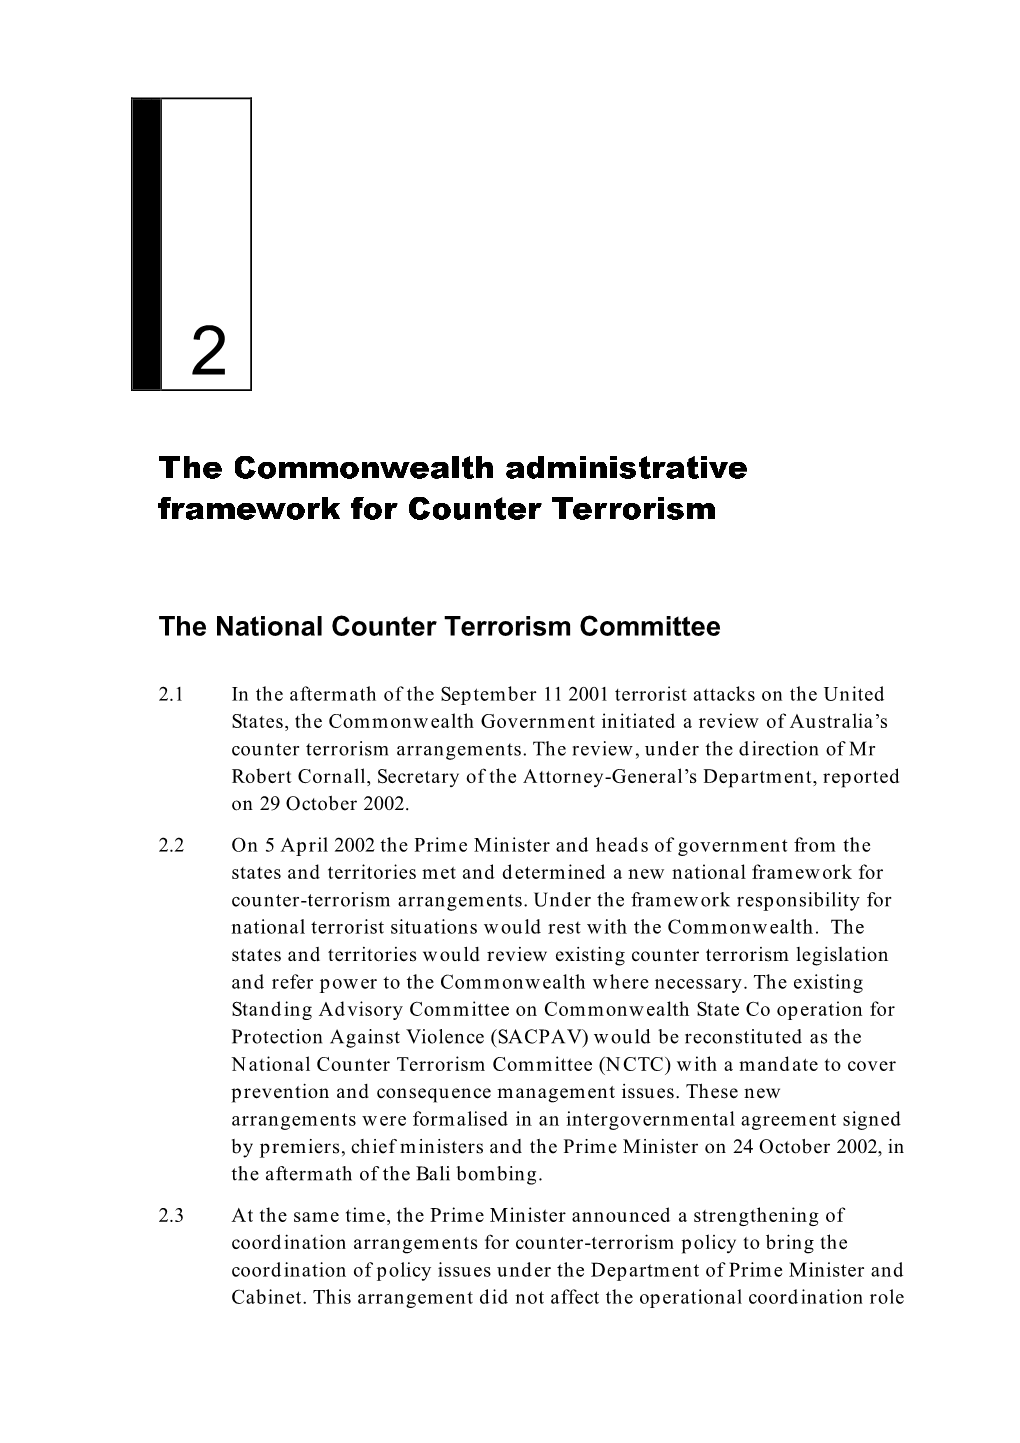 Chapter 2: the Commonwealth Administrative Framework for Counter Terrorism